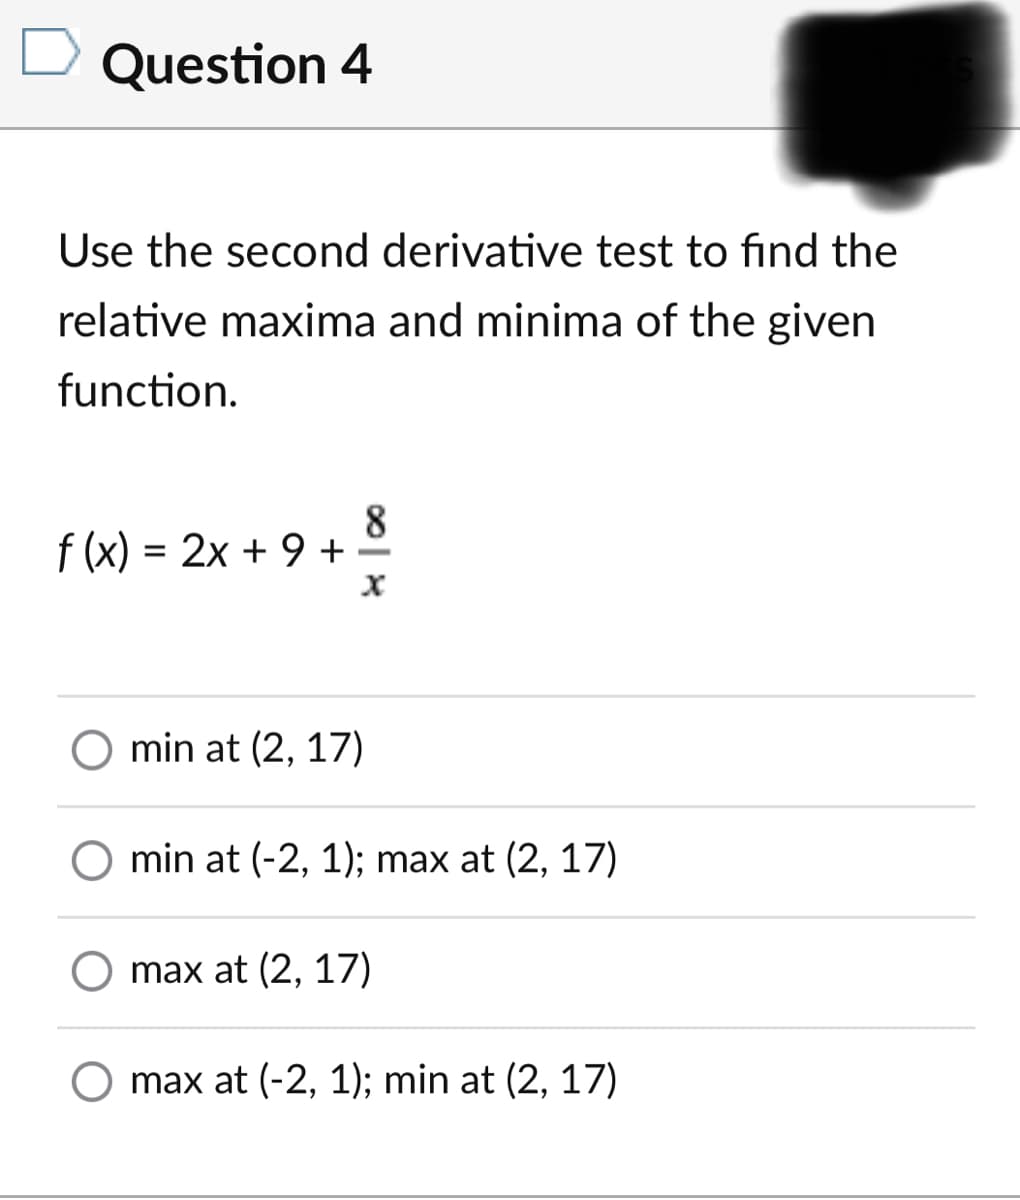 Question 4
Use the second derivative test to find the
relative maxima and minima of the given
function.
f (x) = 2x + 9 + 2
O min at (2, 17)
min at (-2, 1); max at (2, 17)
O max at (2, 17)
max at (-2, 1); min at (2, 17)
